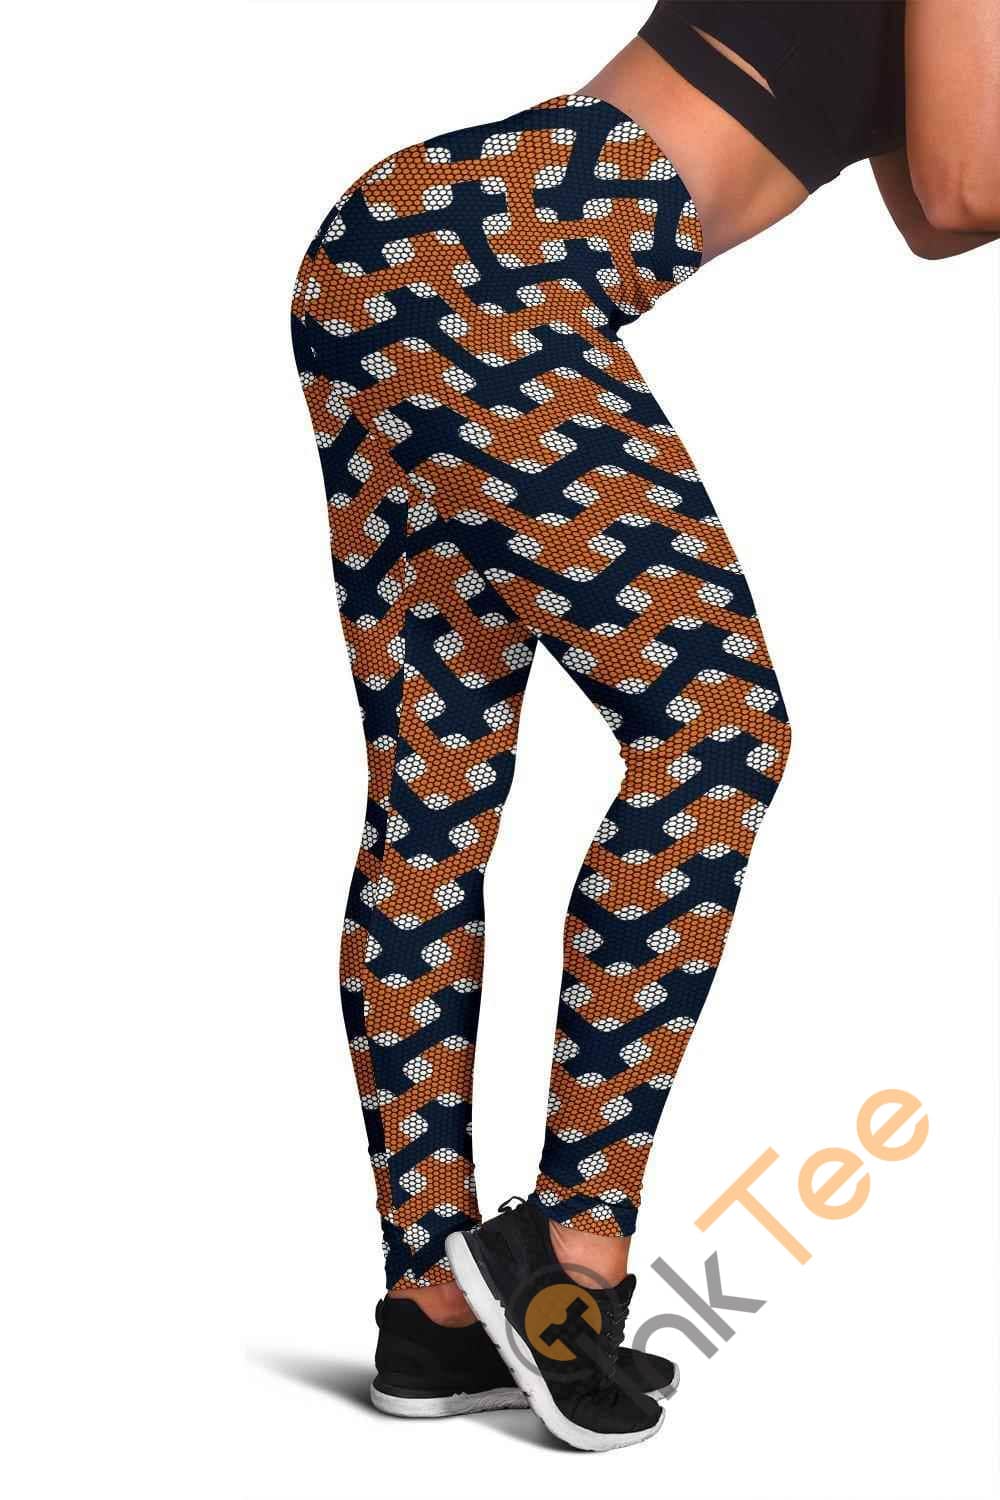 Inktee Store - Auburn Tigers Inspired 3D All Over Print For Yoga Fitness Fashion Women'S Leggings Image